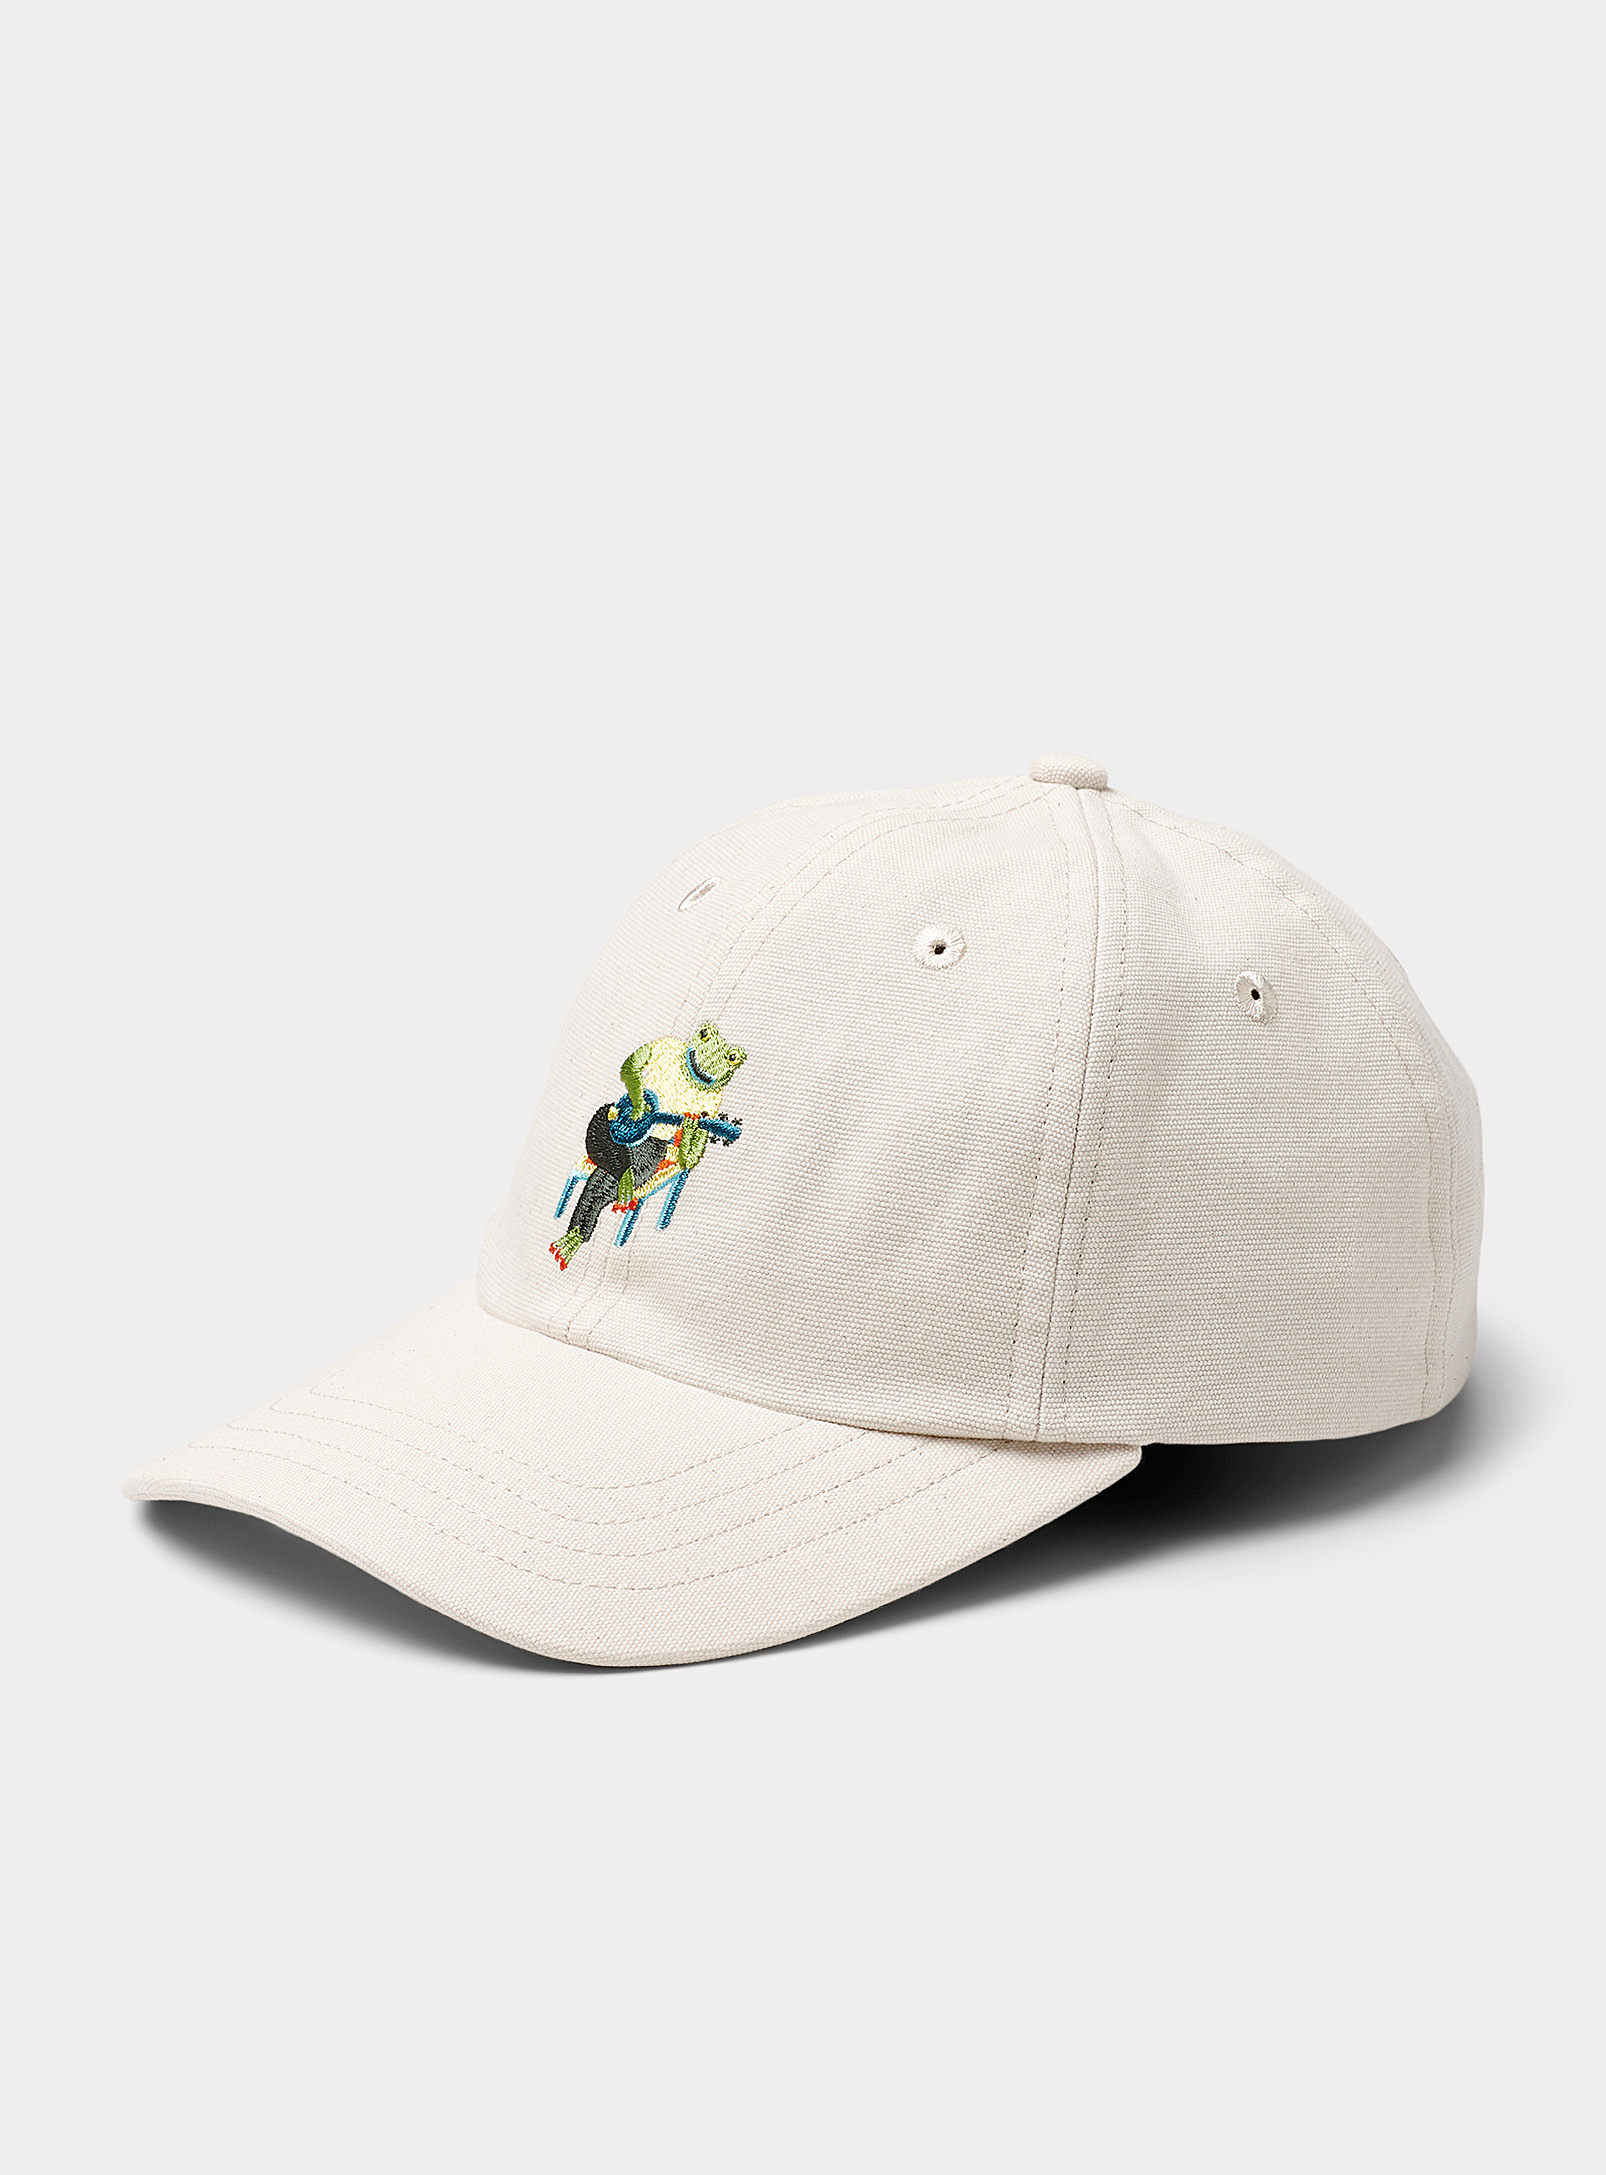 Olow - Men's Musician frog embroidery cap